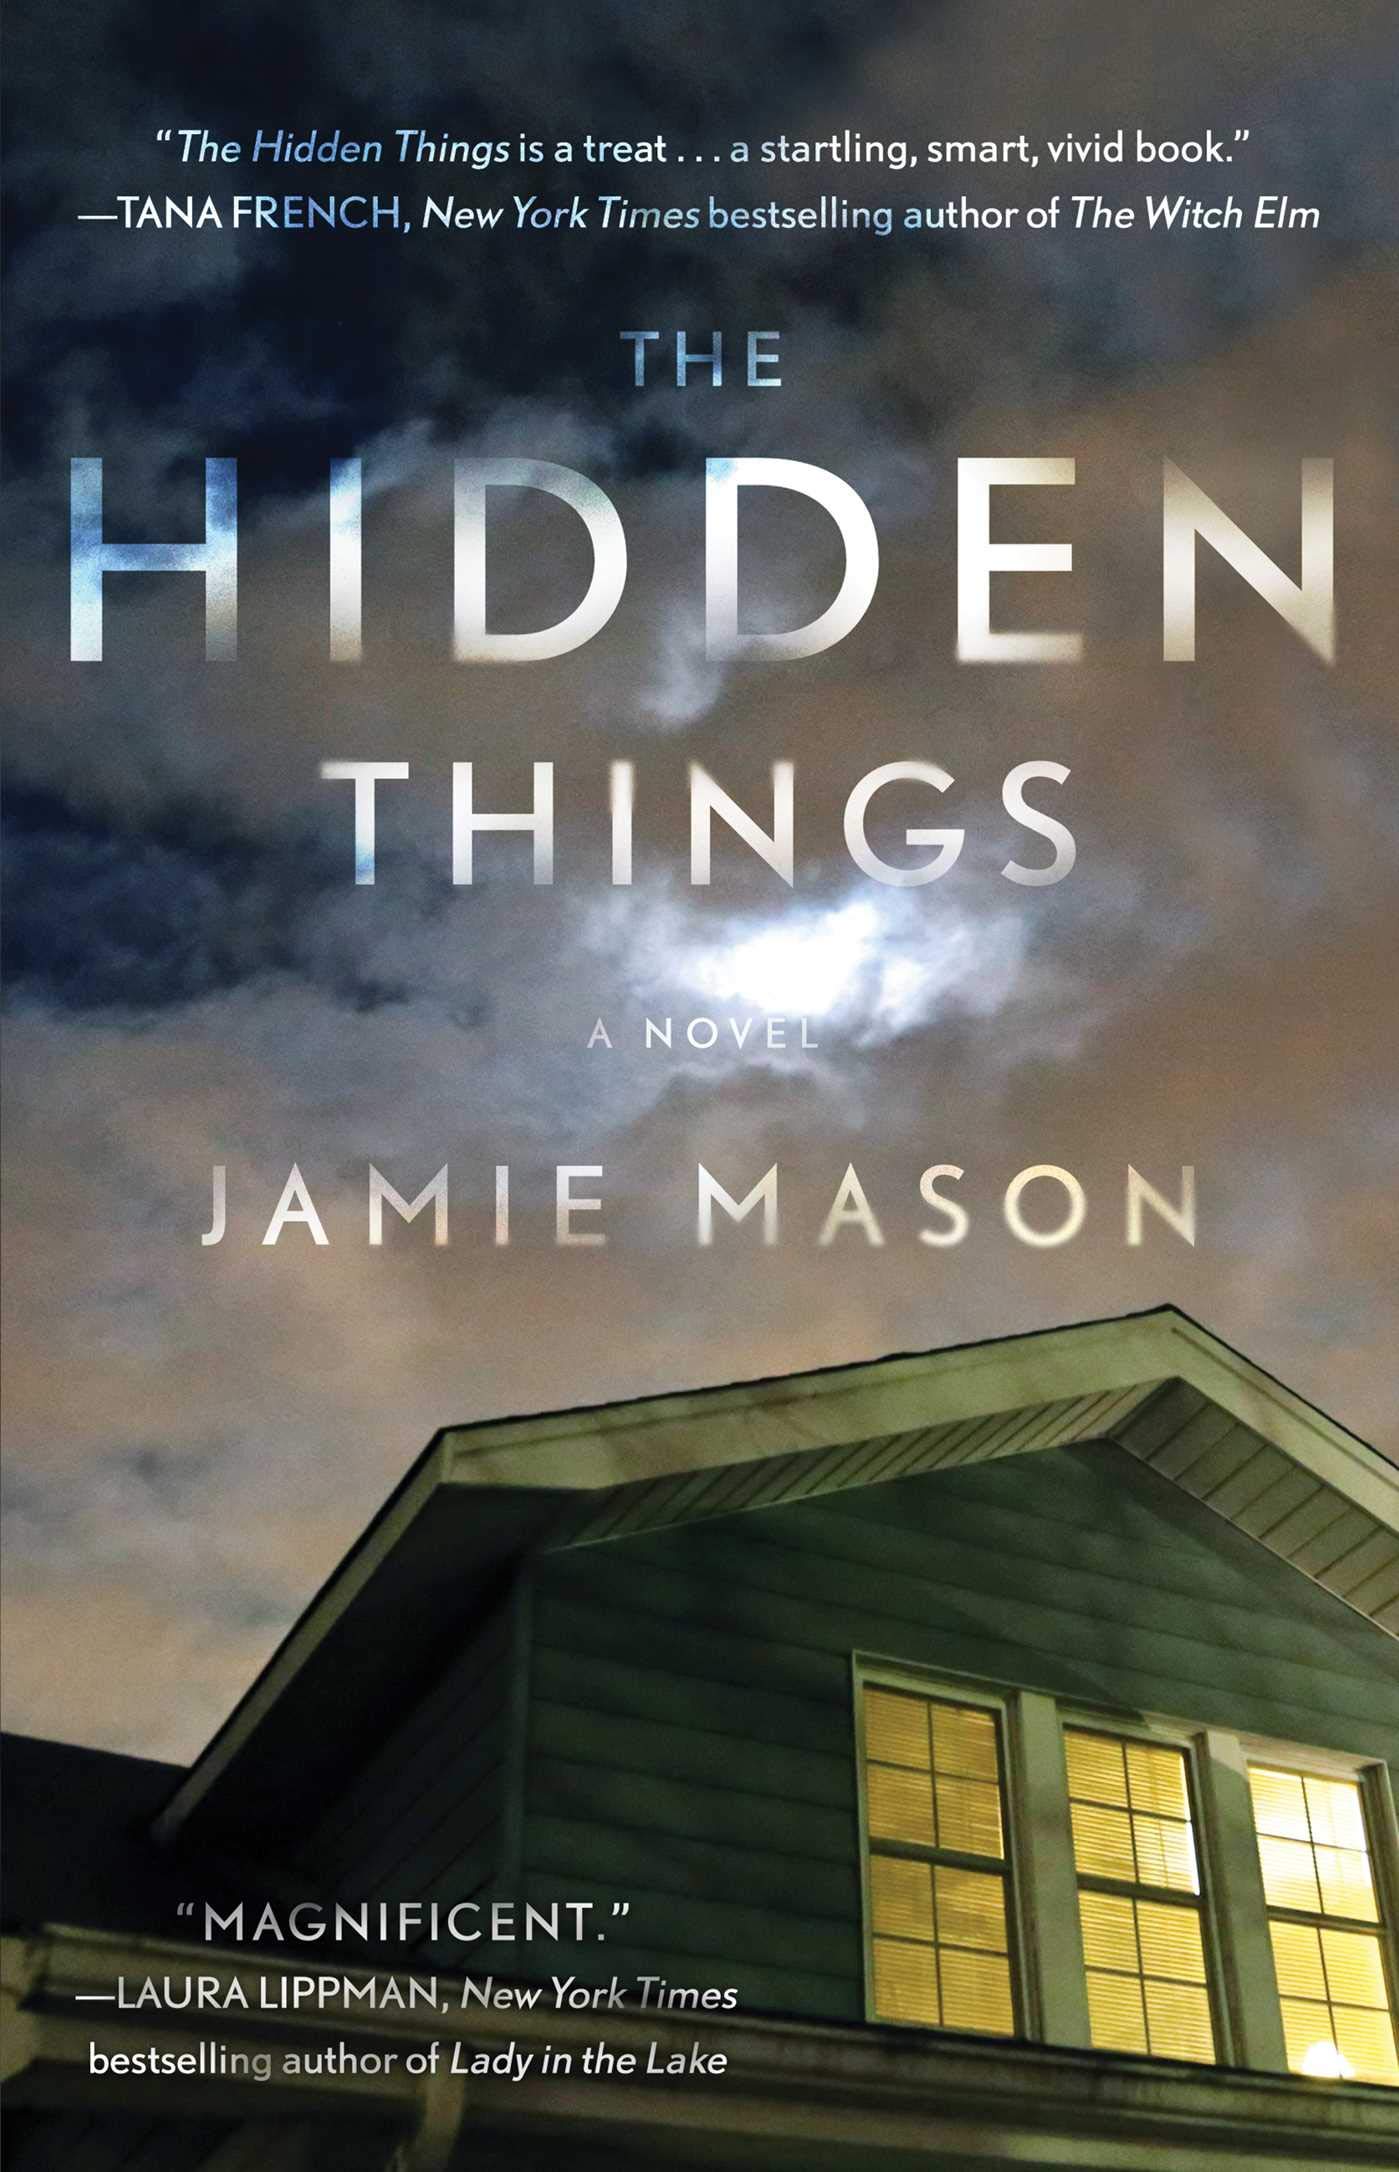 The Hidden Things Book Cover